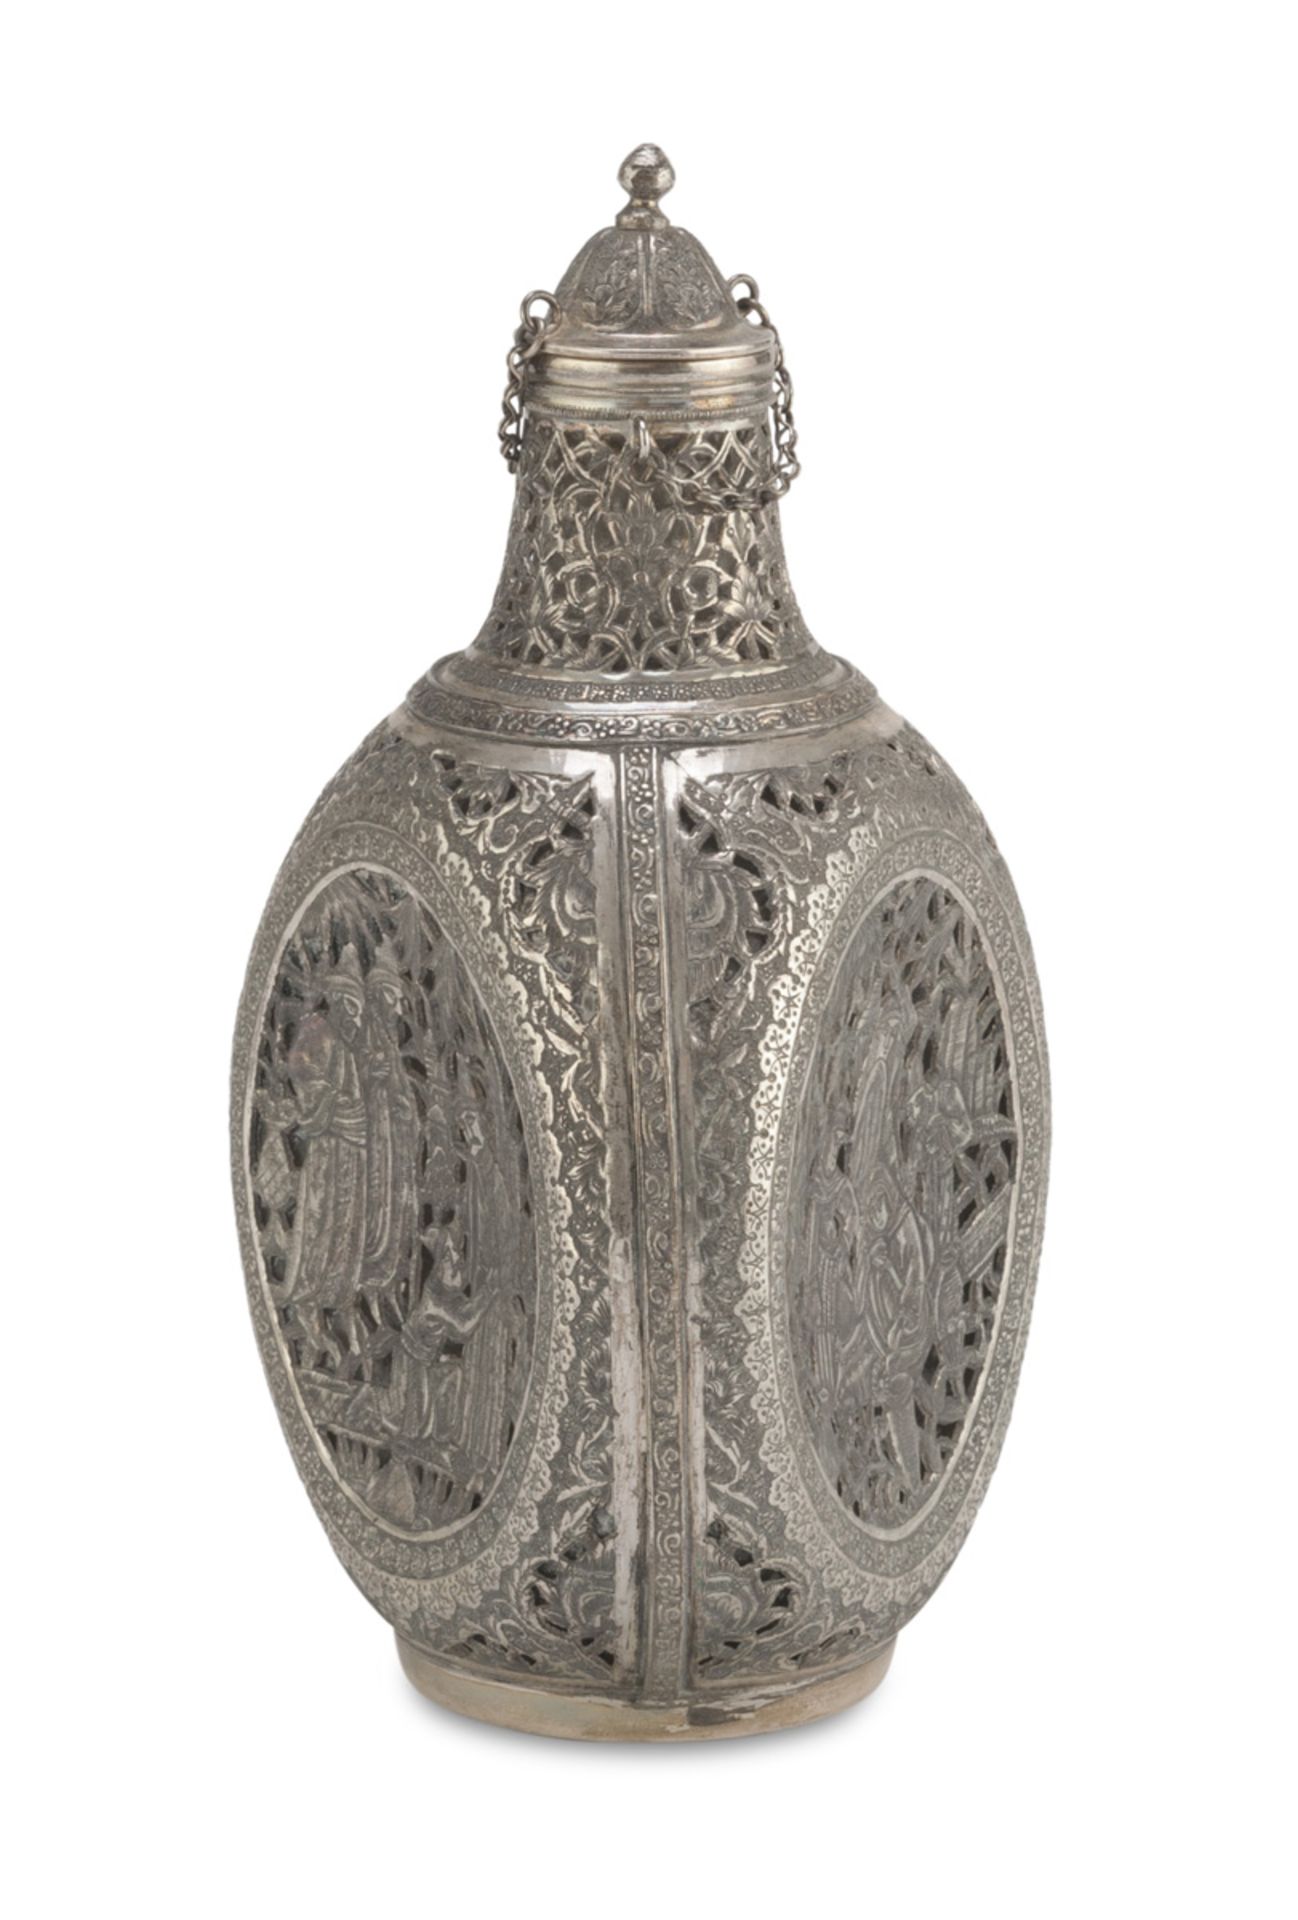 BEAUTIFUL SILVER FLASK, PUNCH PERSIA 19TH CENTURY of triangular shape, pierced and chiseled to